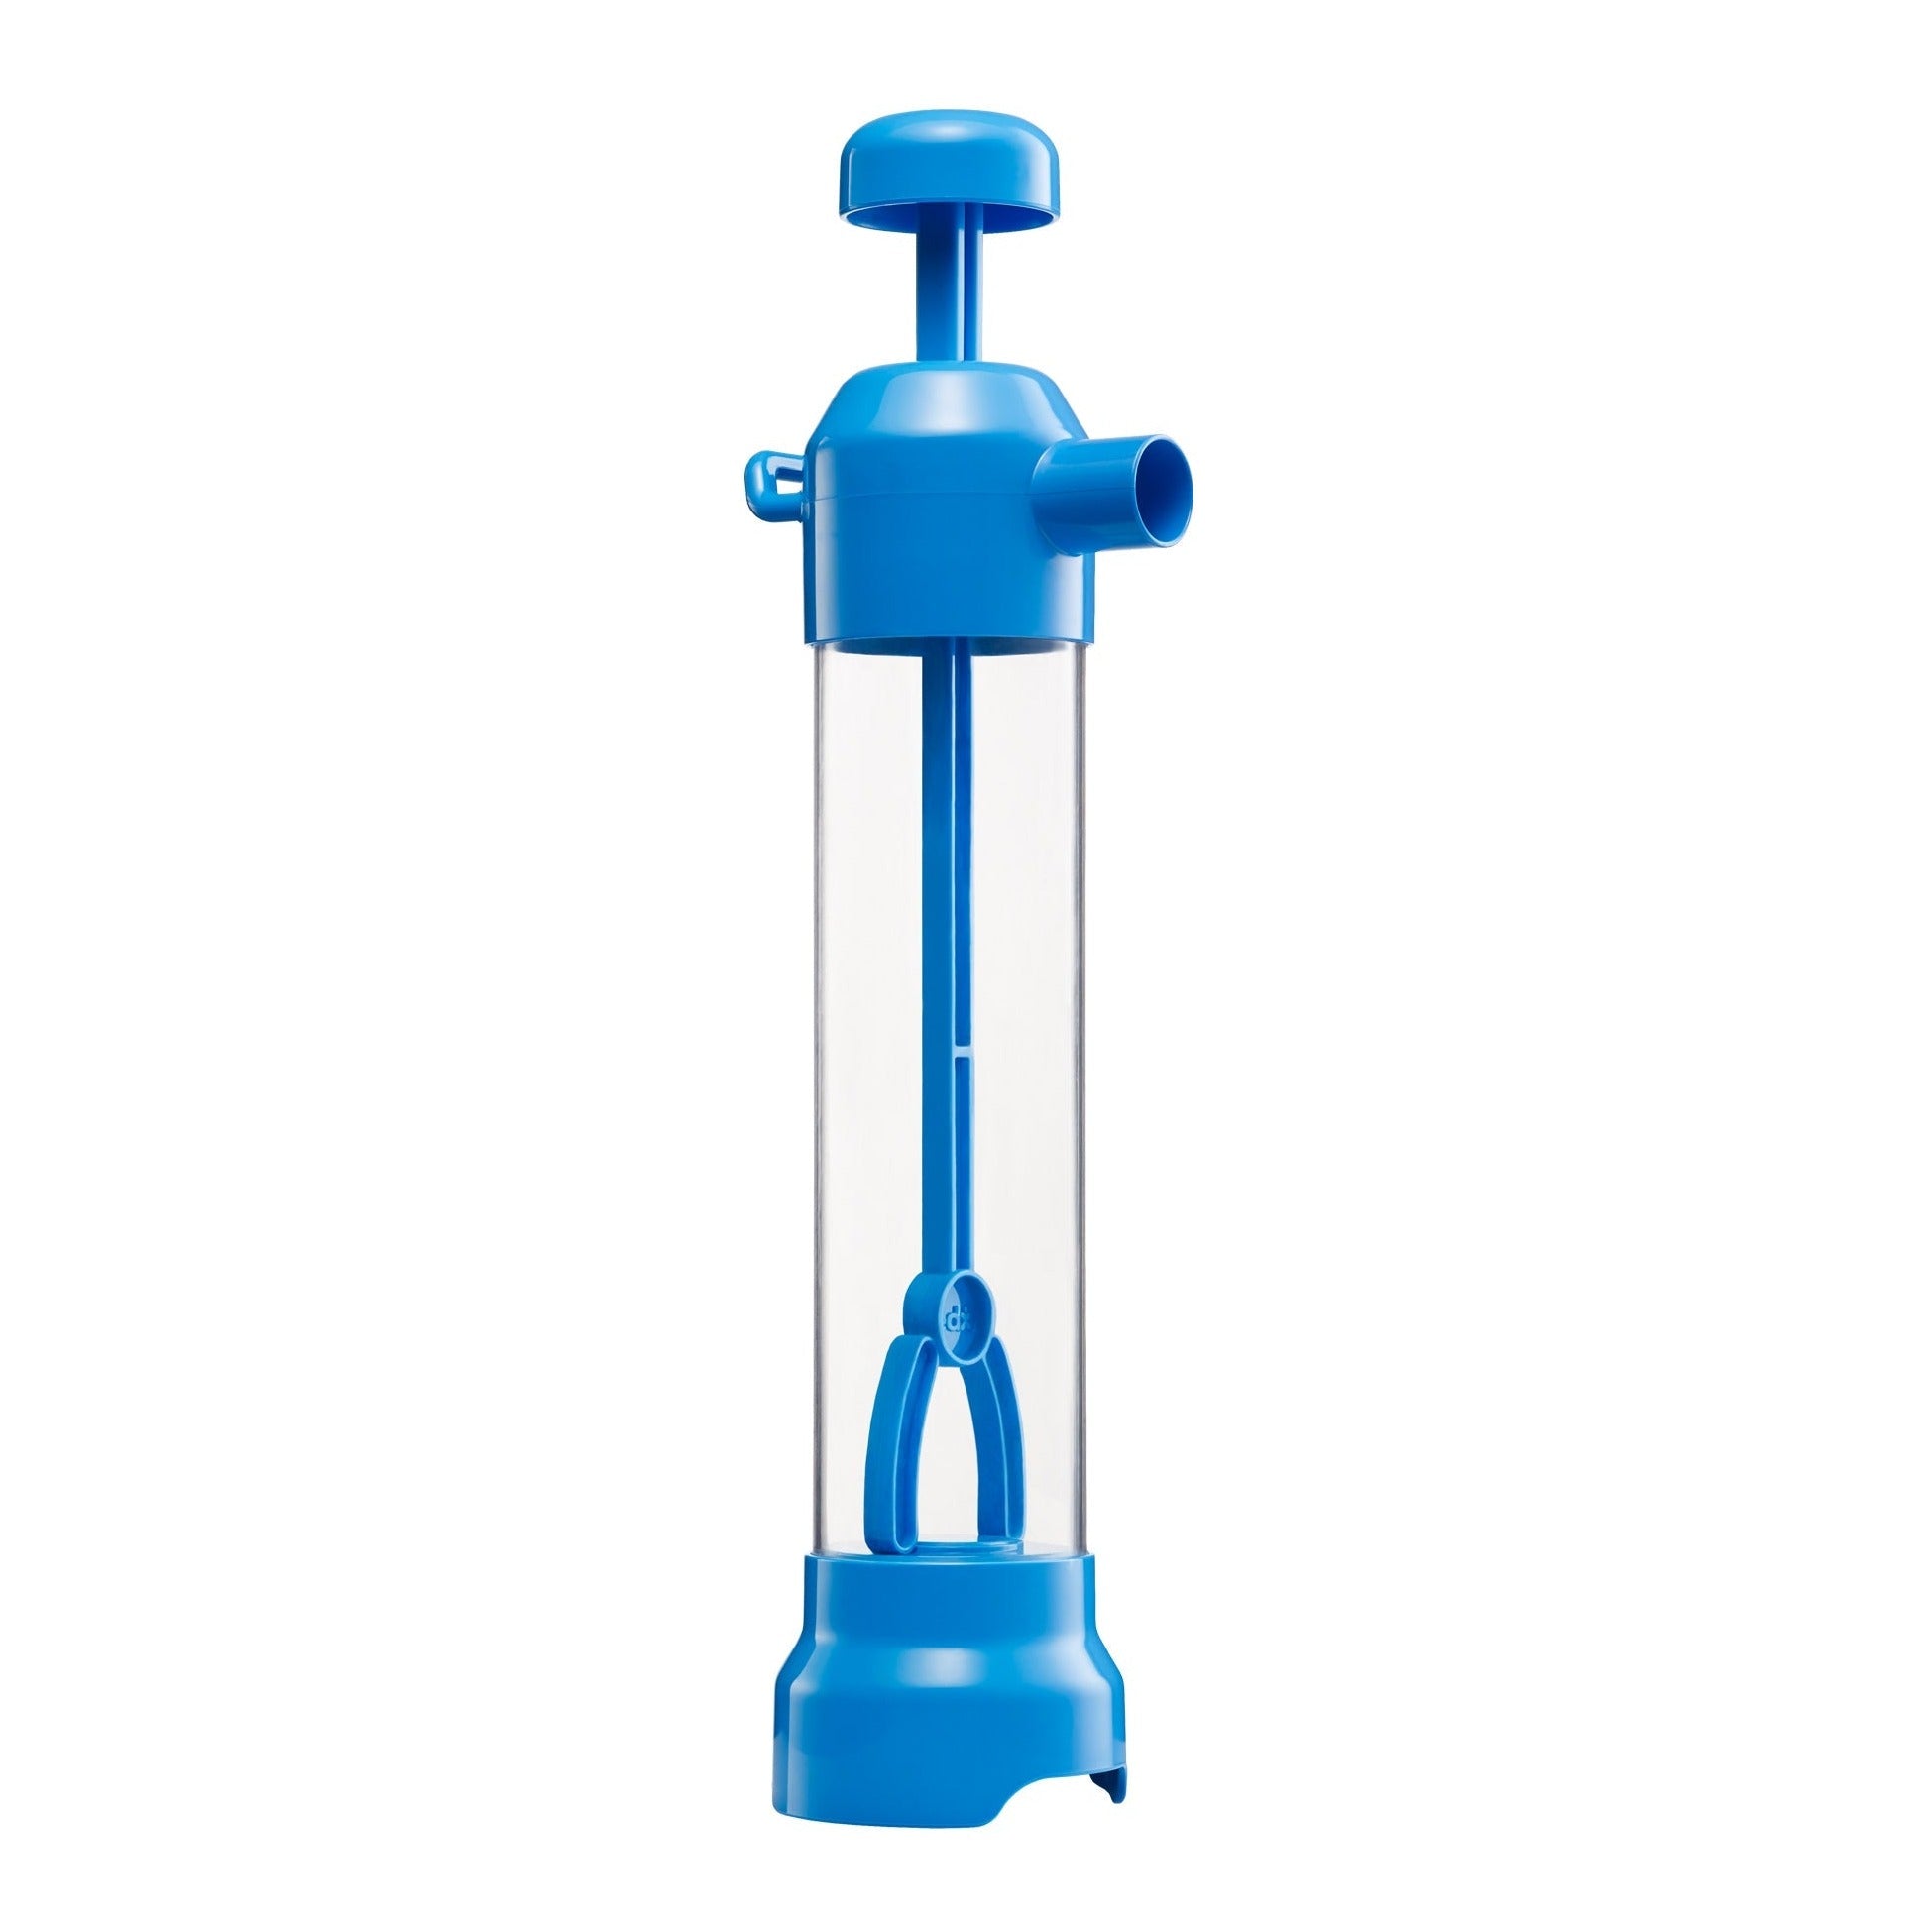 Water Pump, Expand sensory water play! Children will love observing and experimenting with the physics of water using this Water Pump.The plastic in this Water Pump is high quality and durable. It’s designed to withstand the rigors of childhood. Keep children engaged while they use their imaginations in water-themed role play! This water pump supports fine motor and problem solving skills. Children will engage with social and emotional learning, descriptive language, and STEM. Children will experiment with 